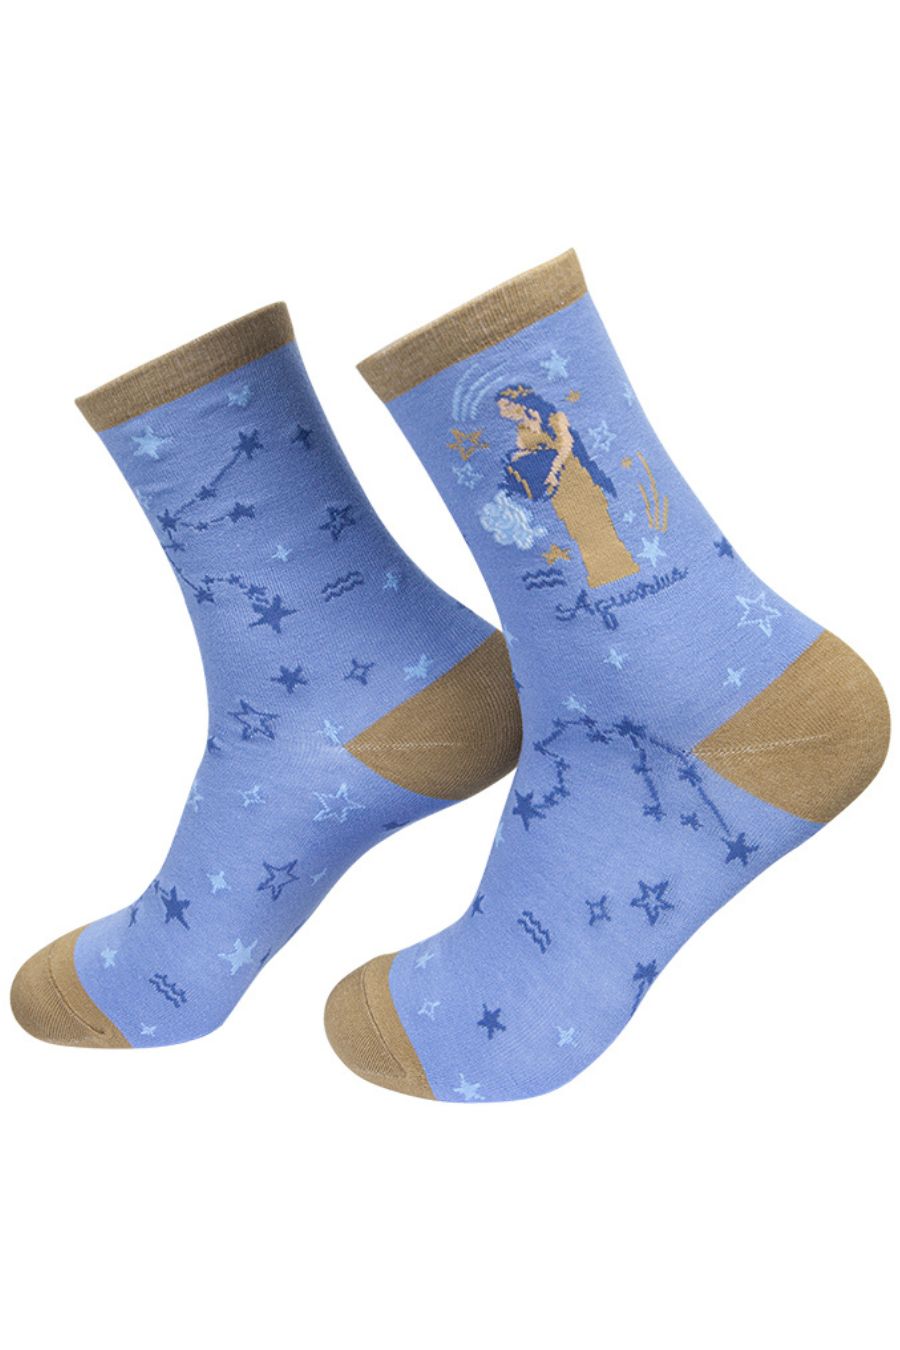 lilac bamboo ankle socks depicting the zodiac sign and constellation of aquarius